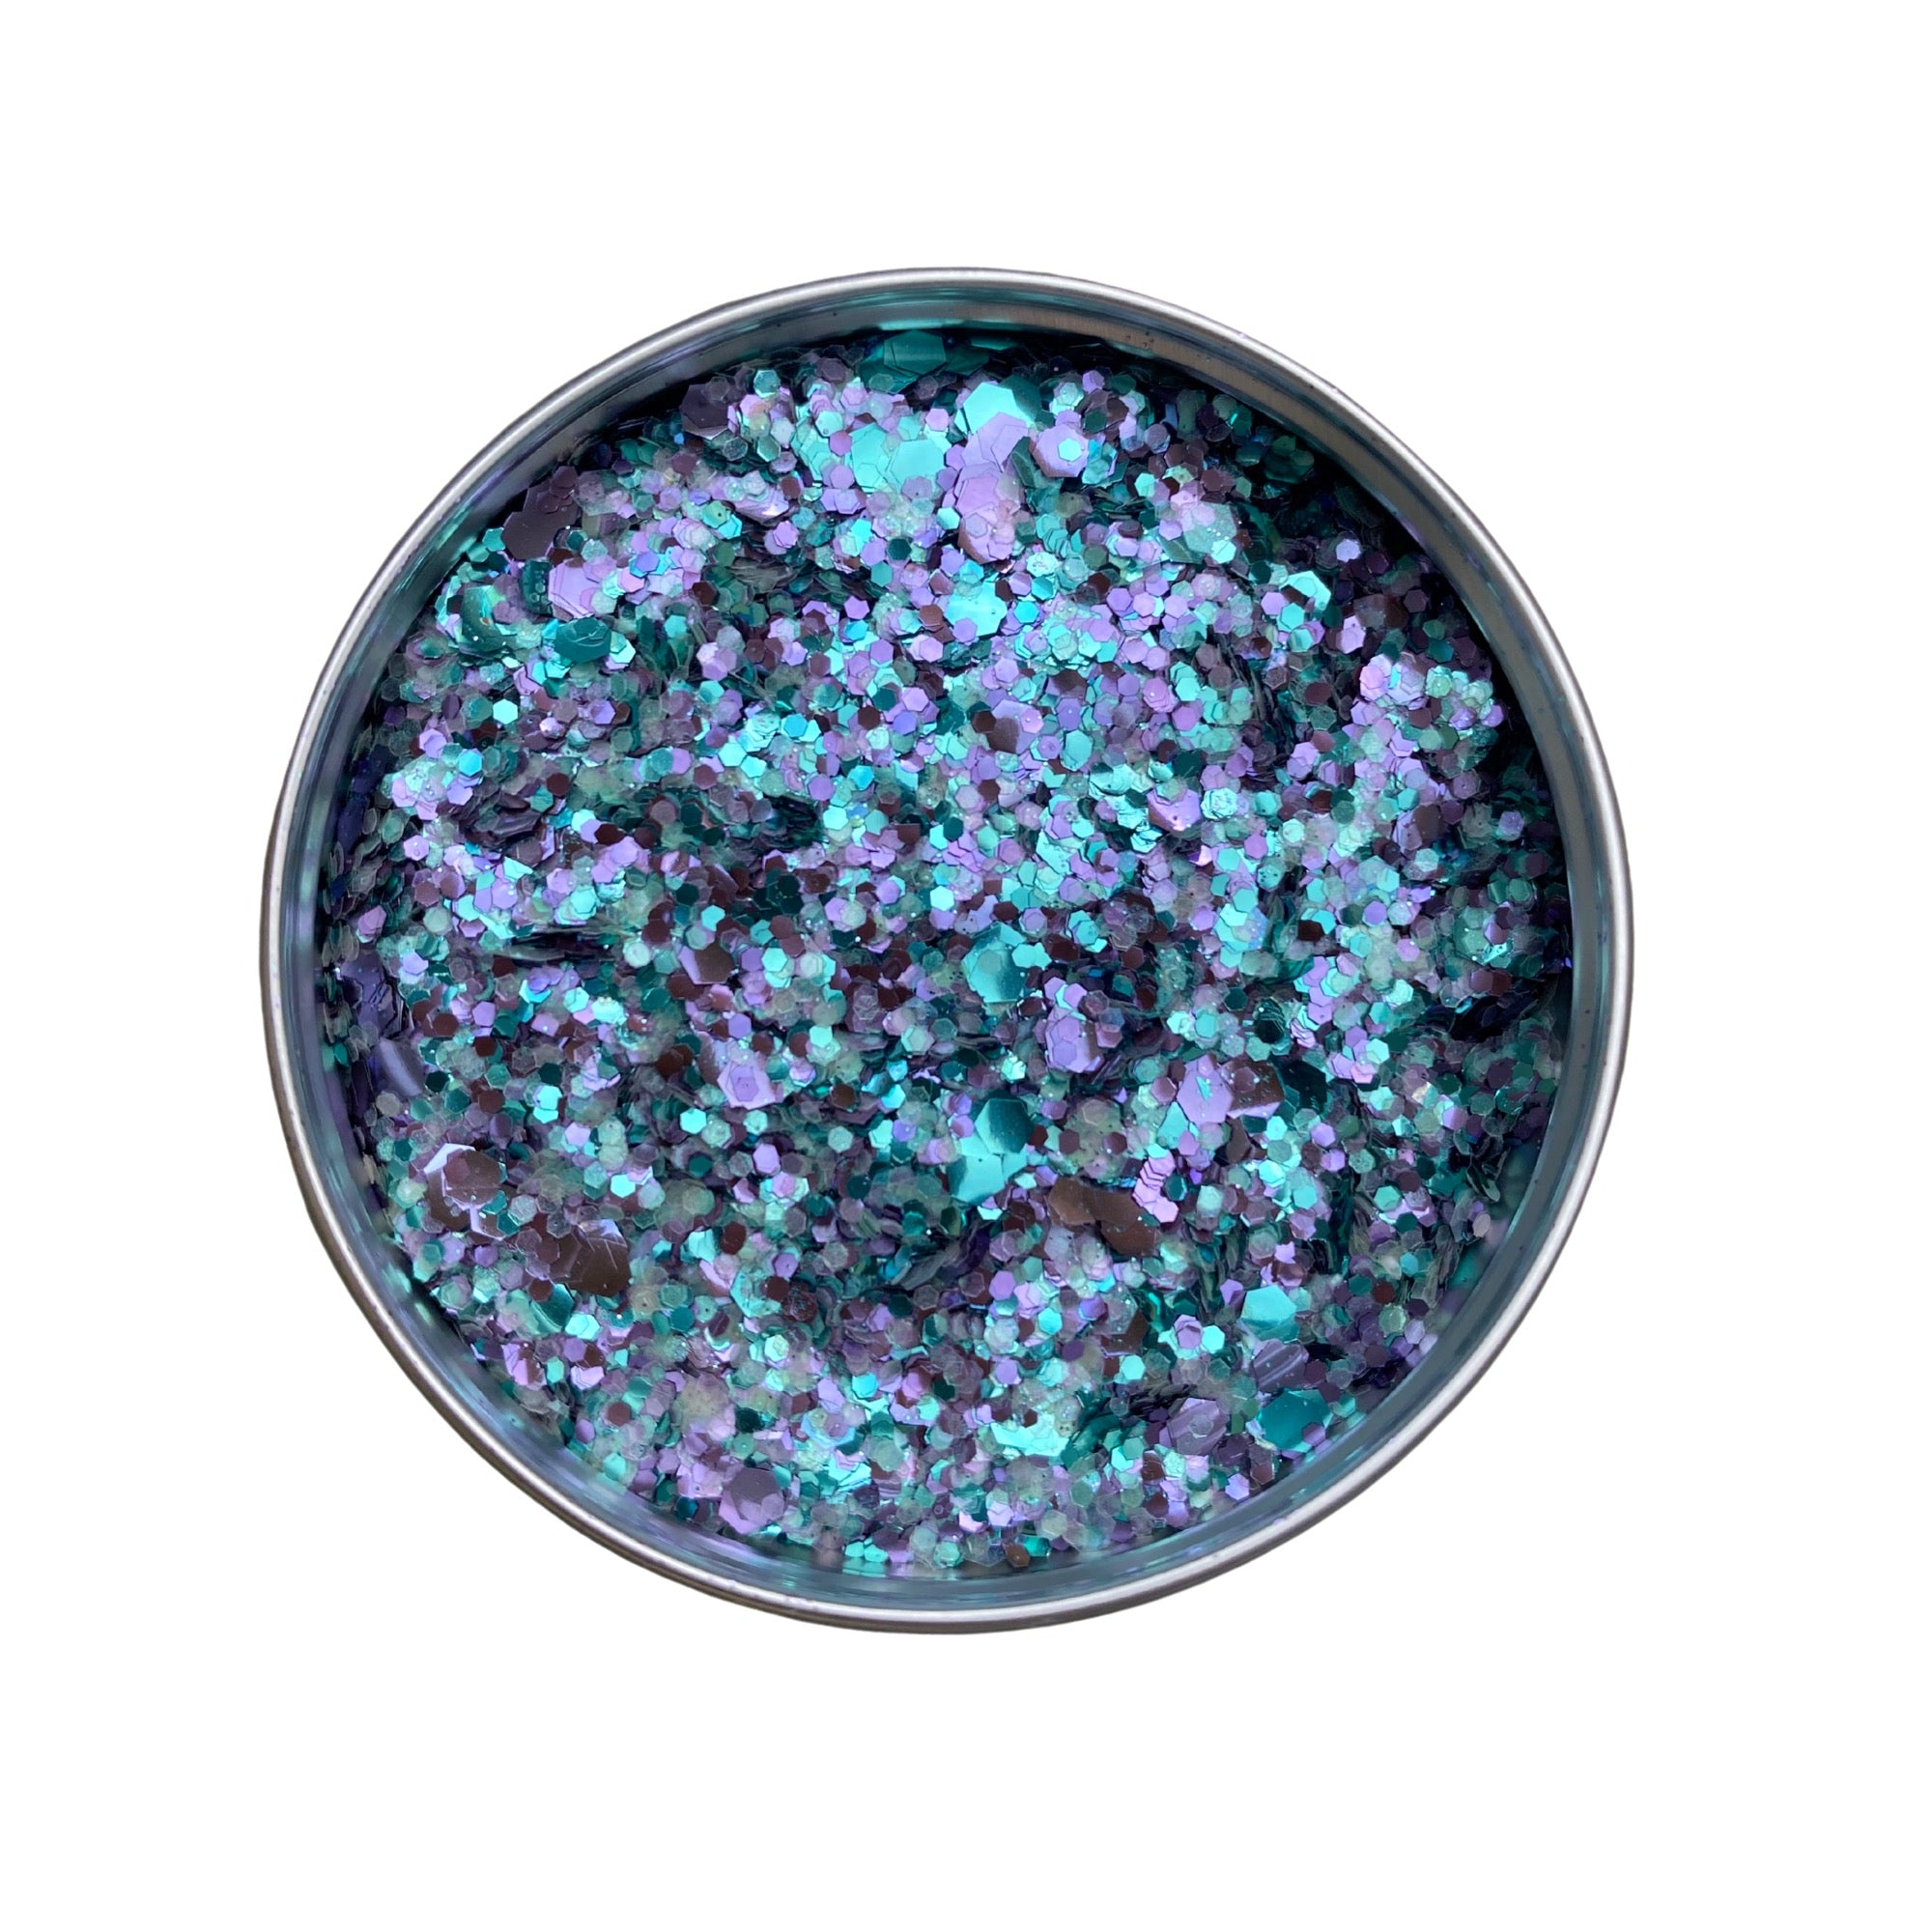 Galaxy Biodegradable glitter blend, fine, chunky and ultra chunky glitters including pure opal iridescent glitter